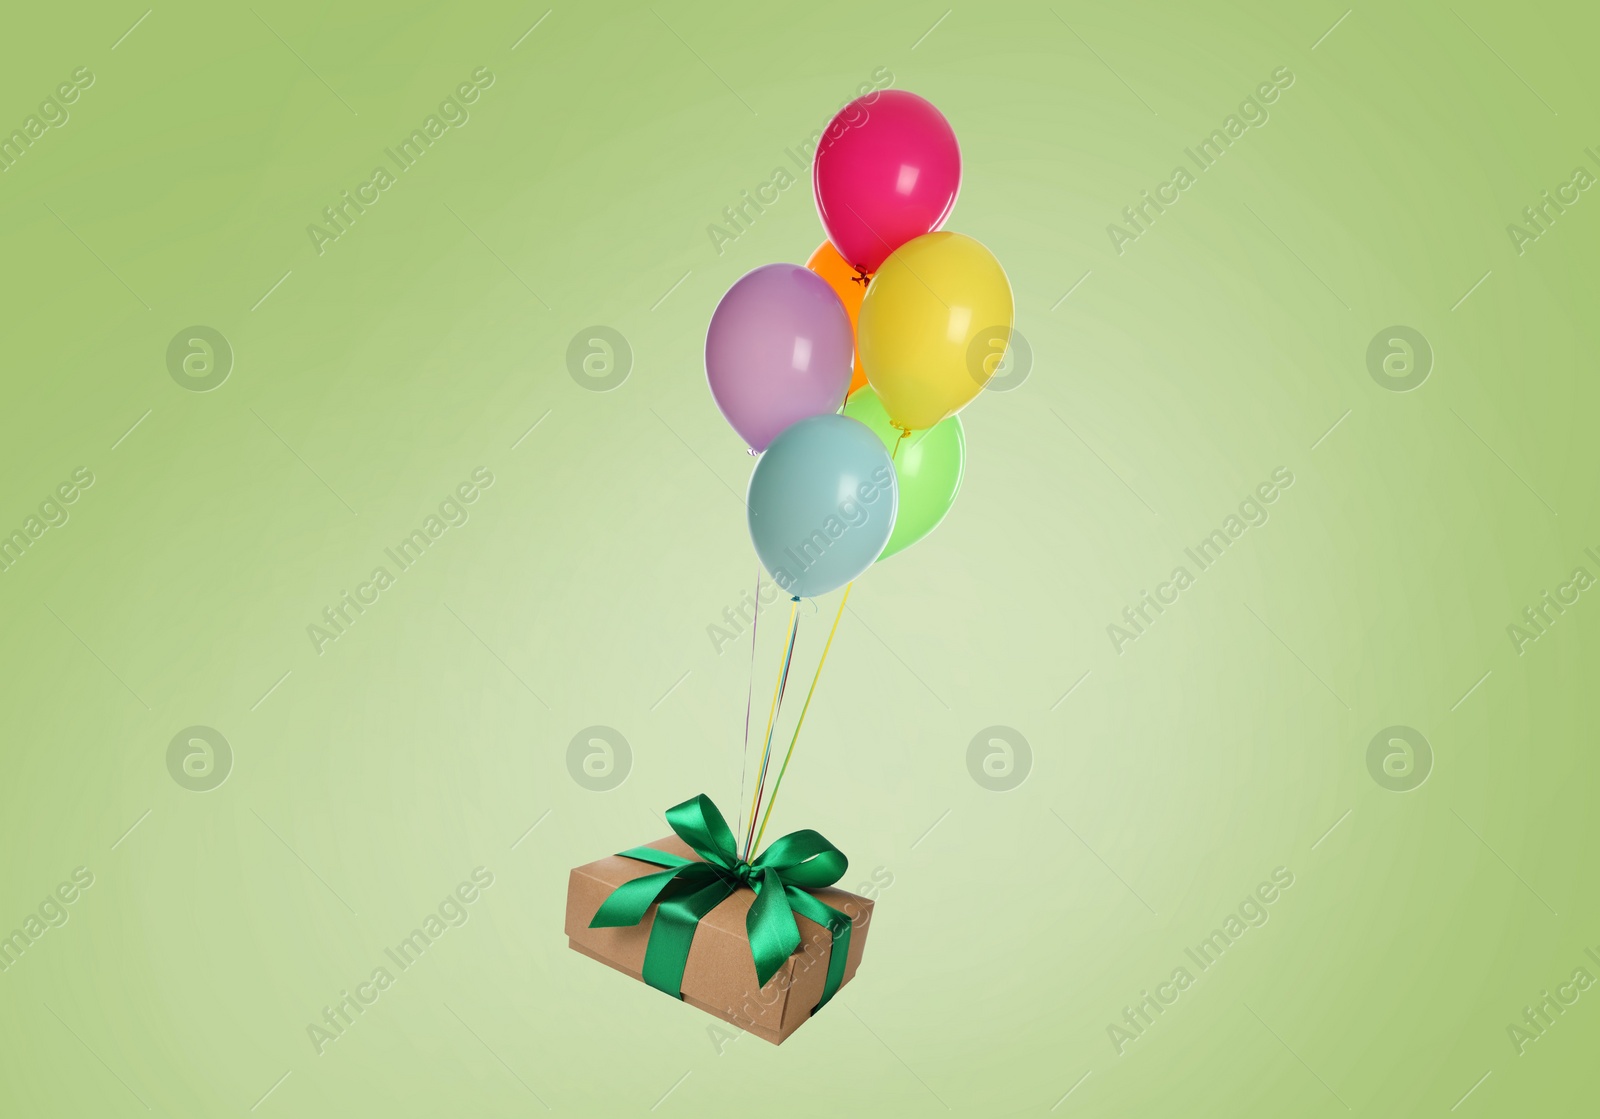 Image of Many balloons tied to gift box on light green background